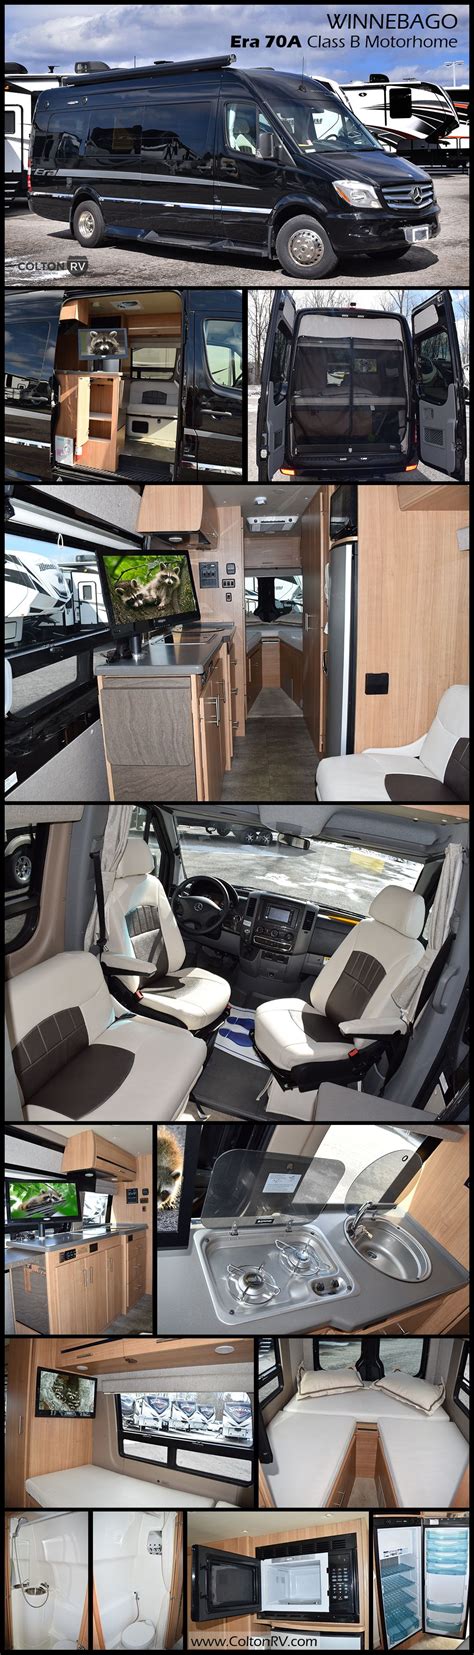 We have 413 cars for sale for mercedes era, from just $9,995. The WINNEBAGO TOURING COACH ERA Class B motorhome just ...